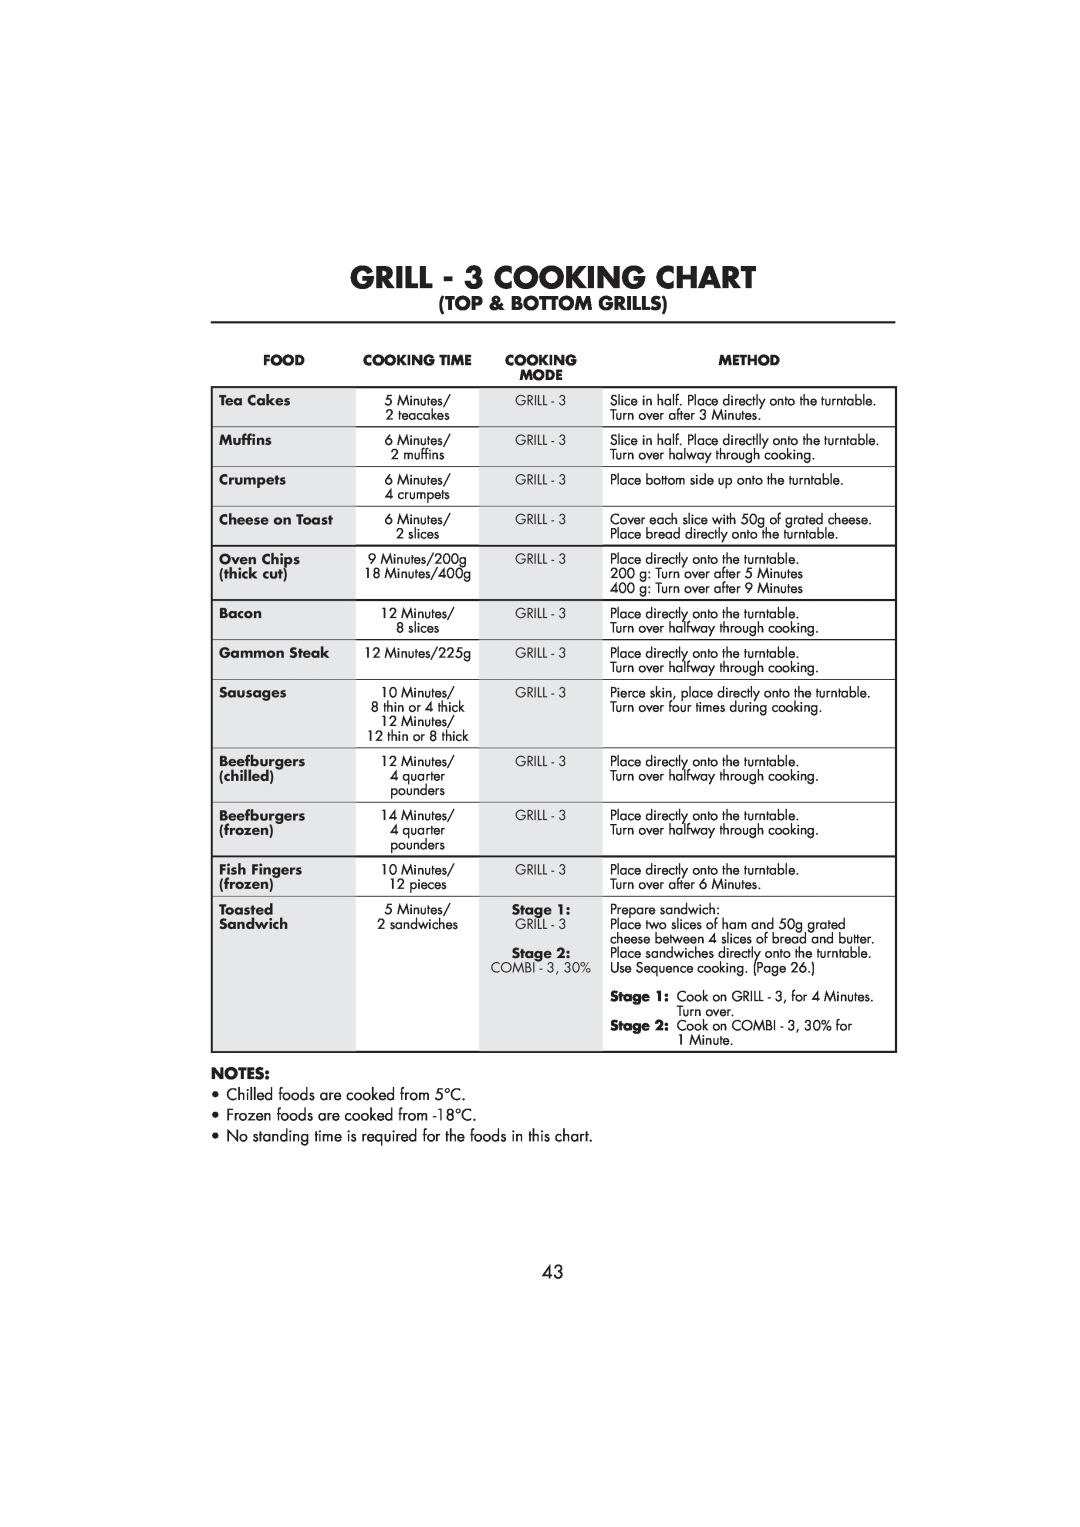 Sharp R-890SLM operation manual GRILL - 3 COOKING CHART, Top & Bottom Grills 